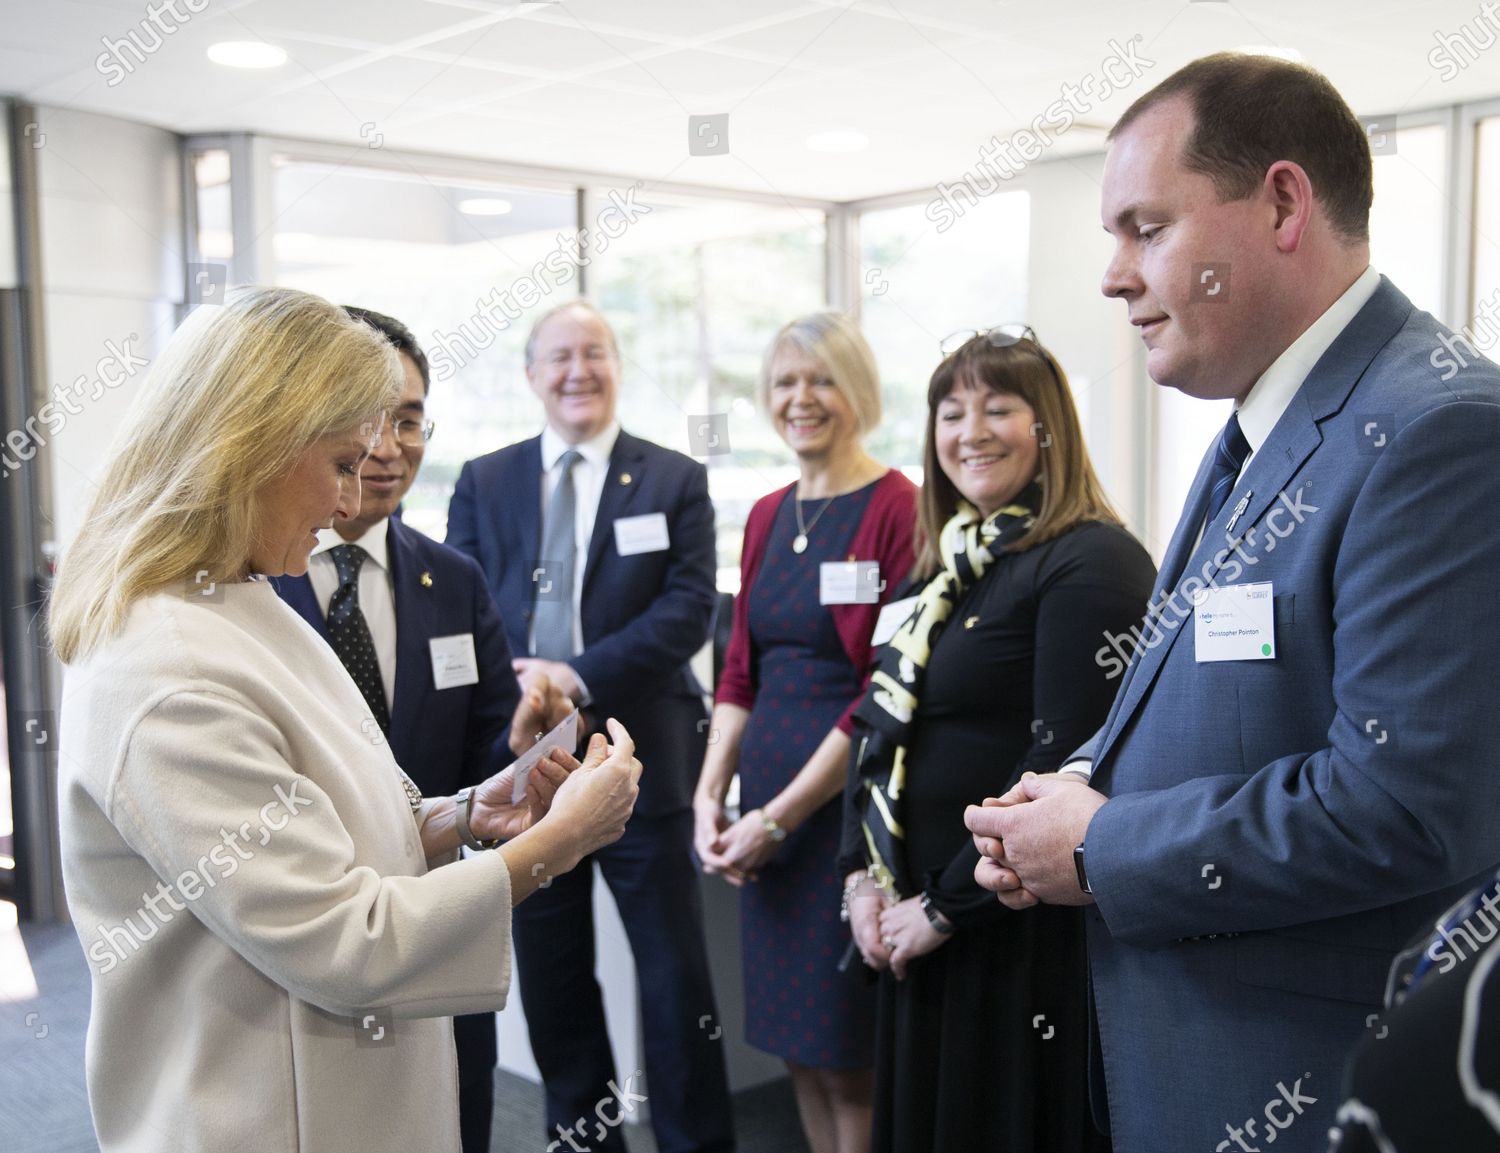 CASA REAL BRITÁNICA - Página 14 Sophie-countess-of-wessex-opens-new-health-sciences-institute-university-of-surrey-guildford-uk-shutterstock-editorial-10542421e